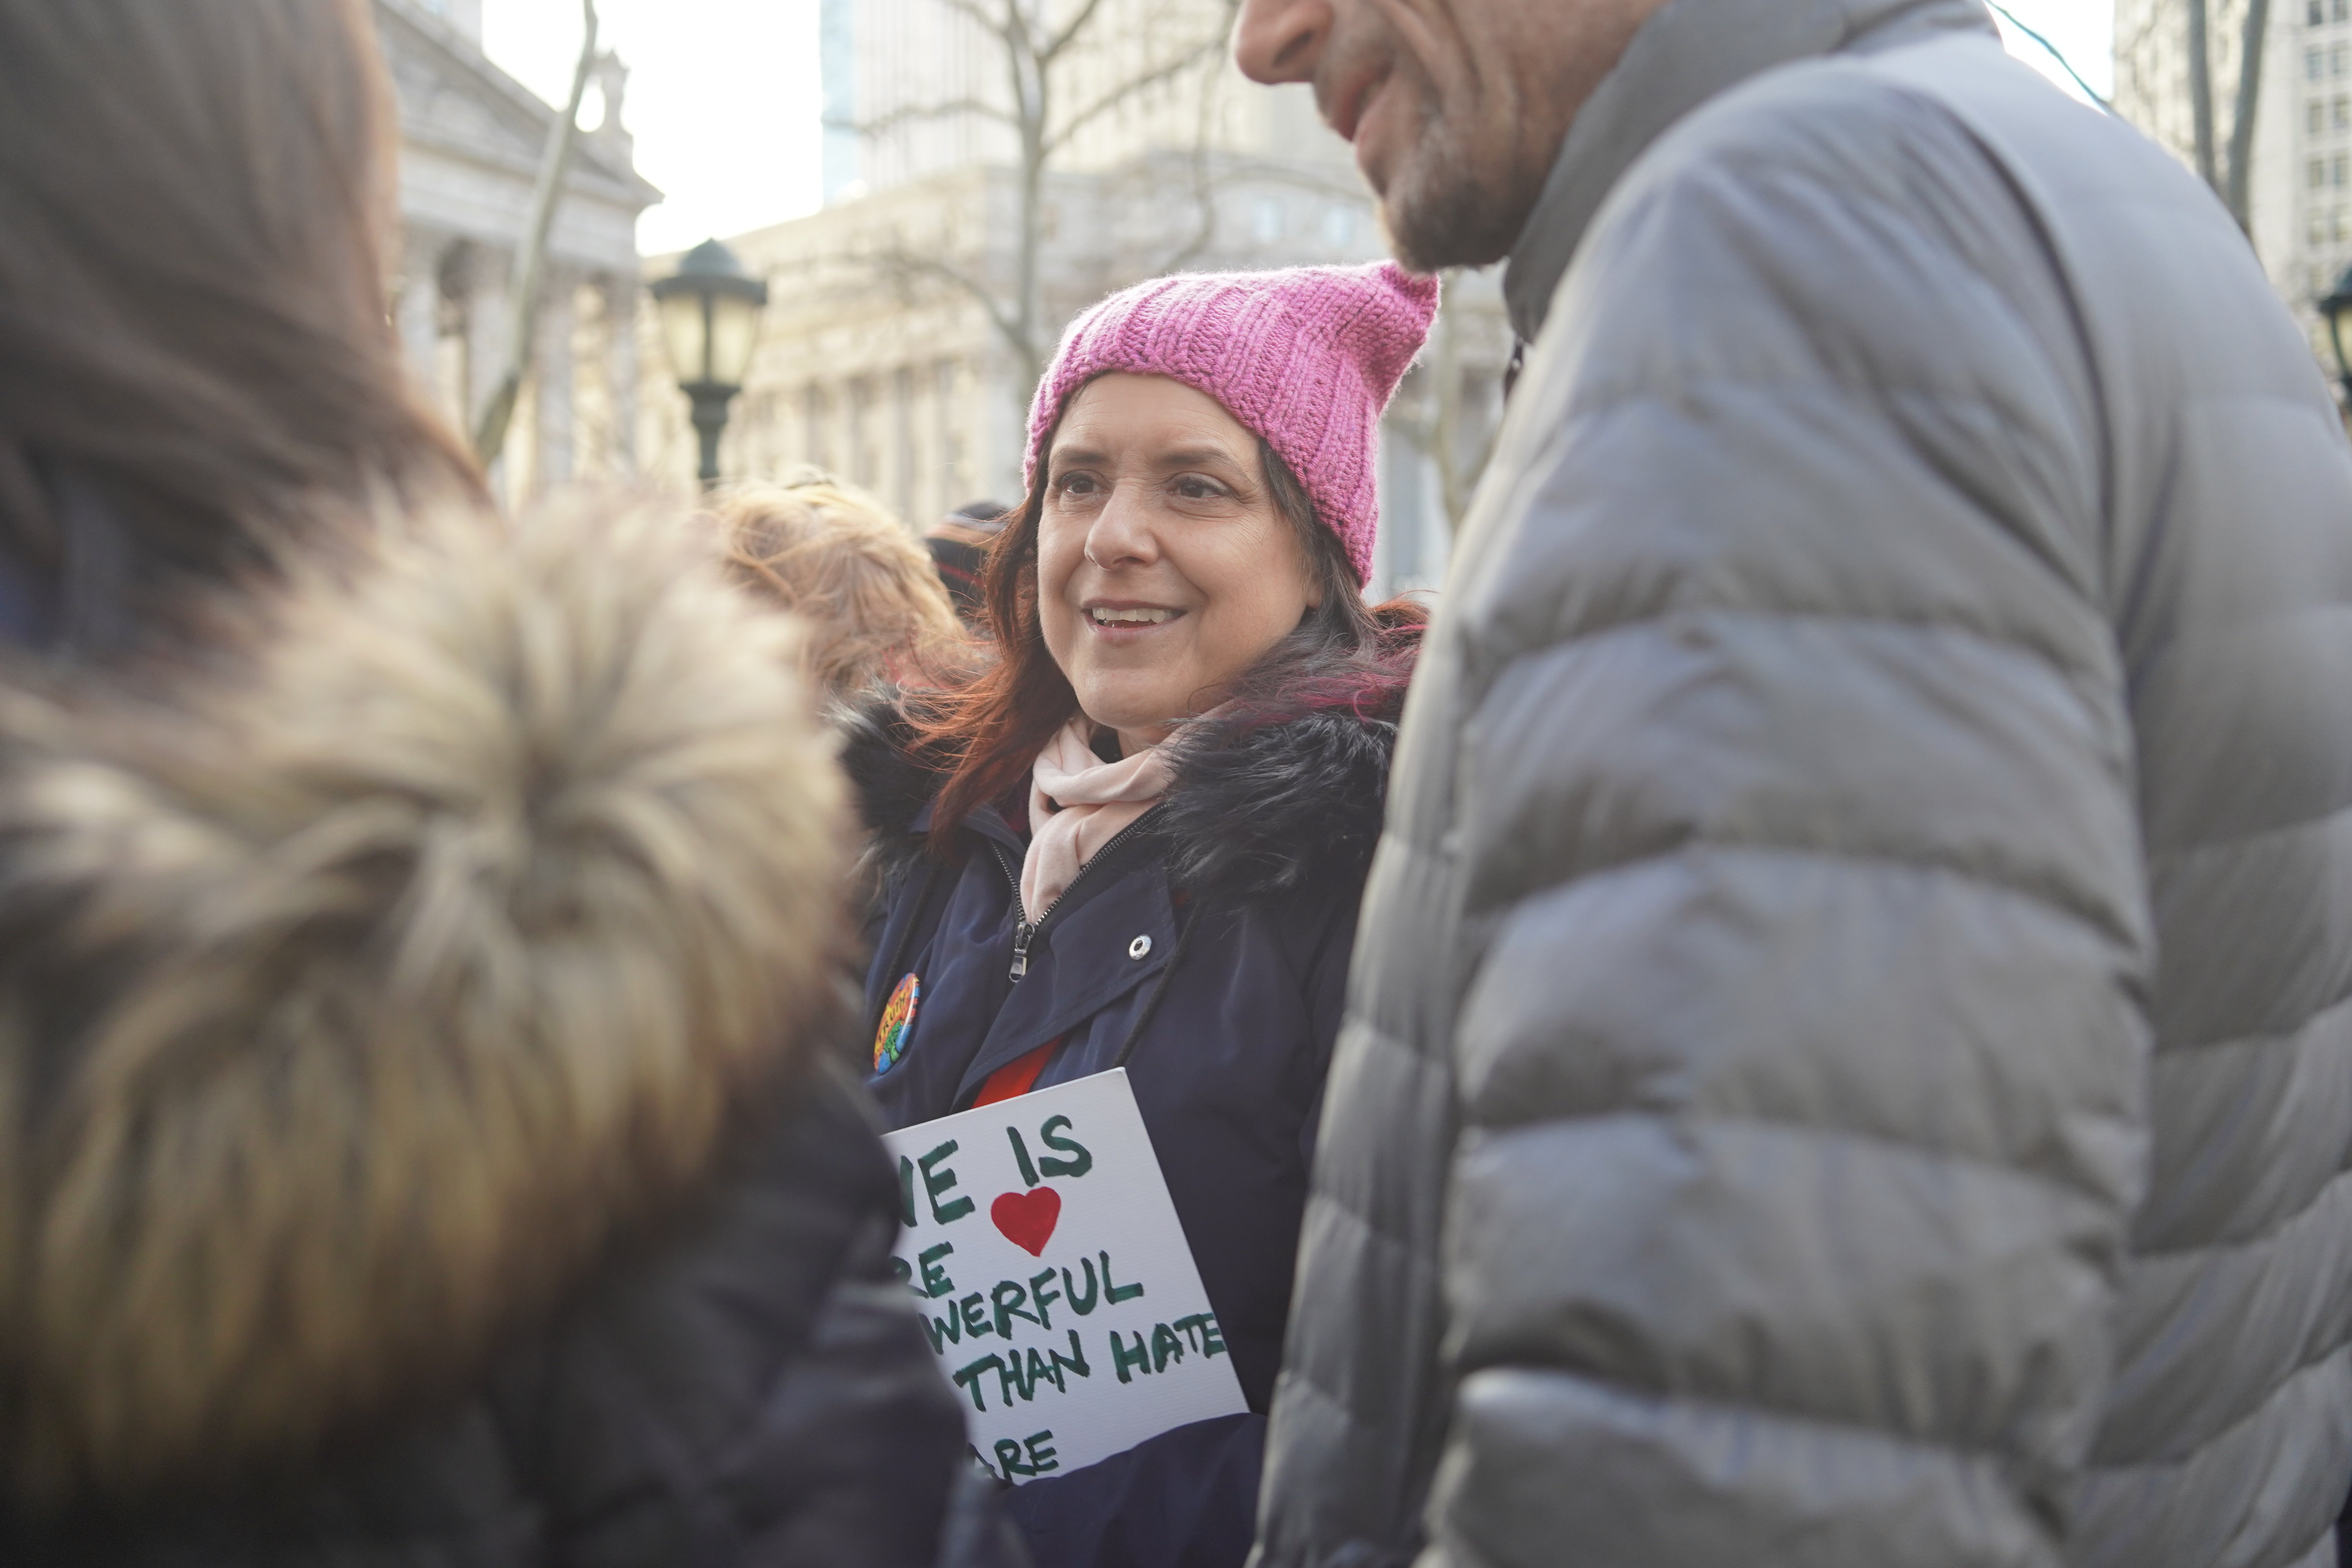 woman with pink hat and sign